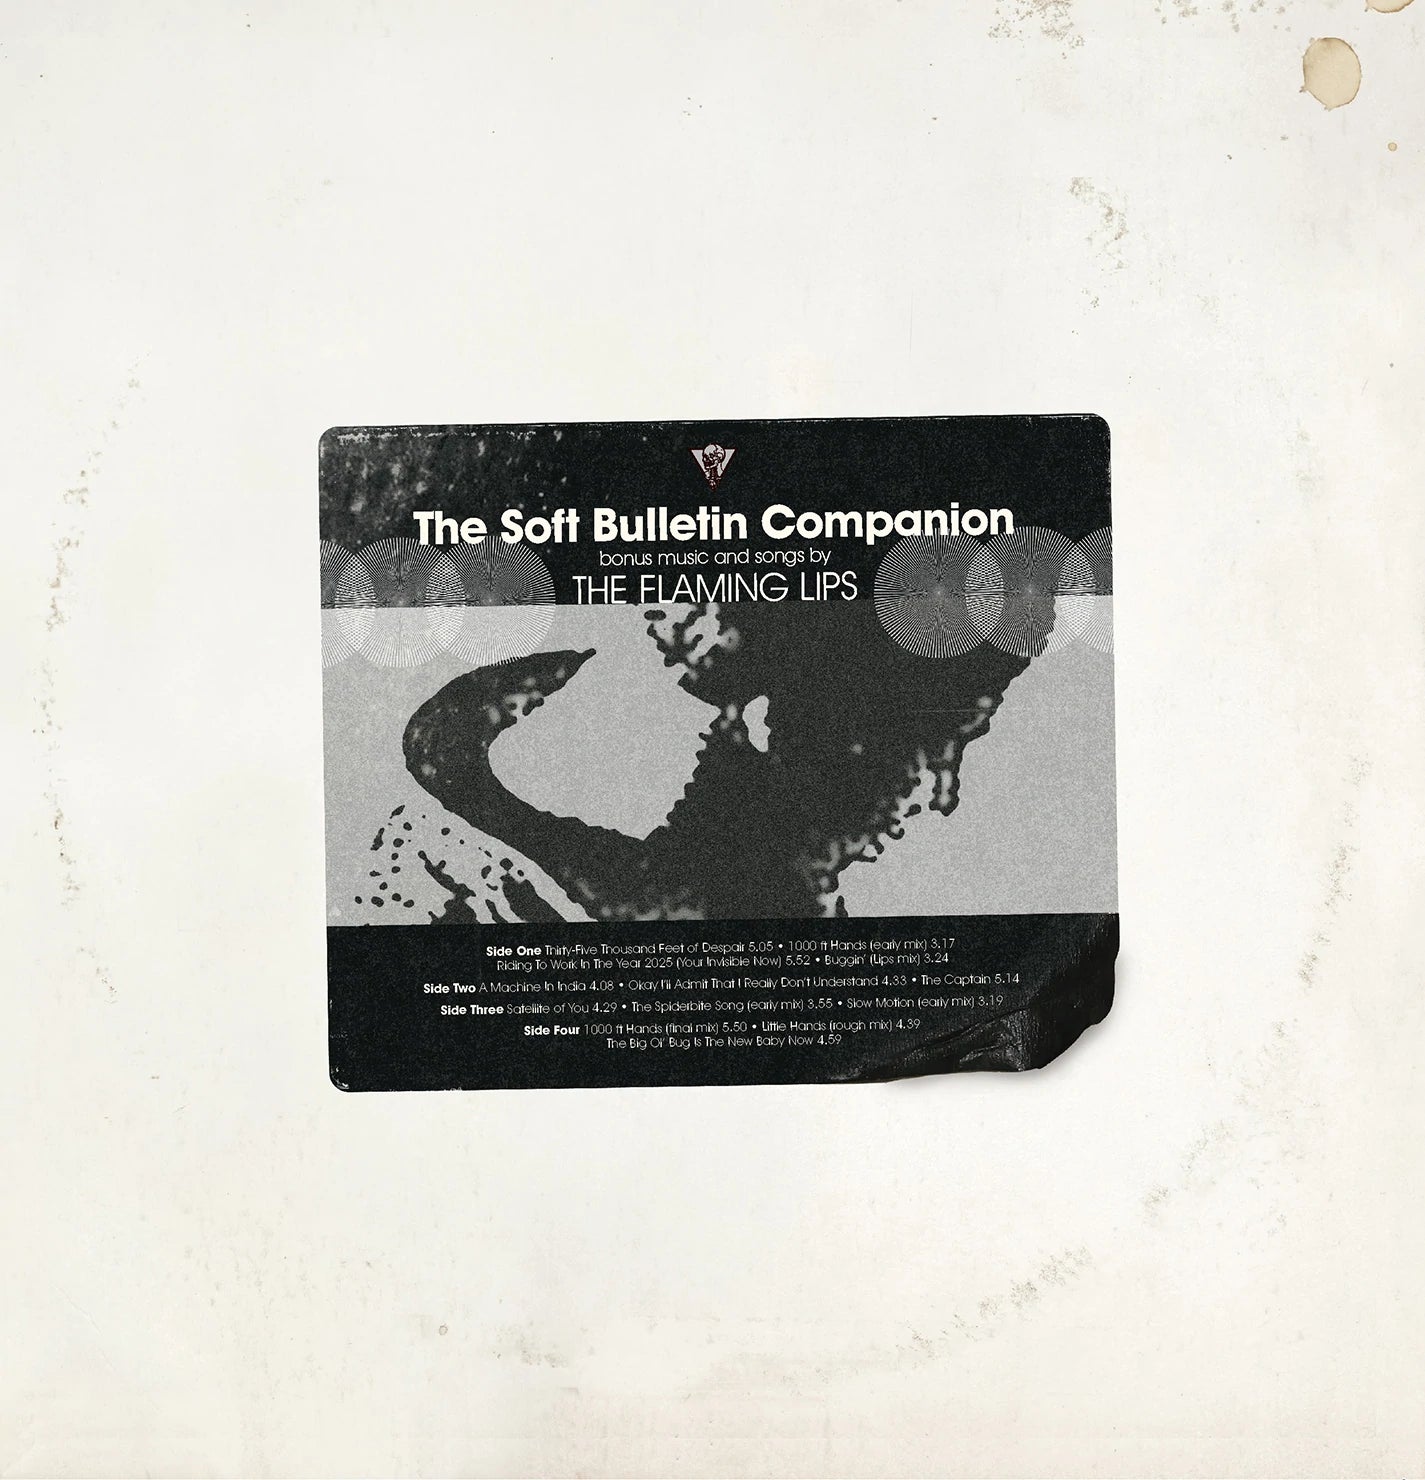 The Flaming Lips - The Soft Bulletin Companion - Saint Marie Records